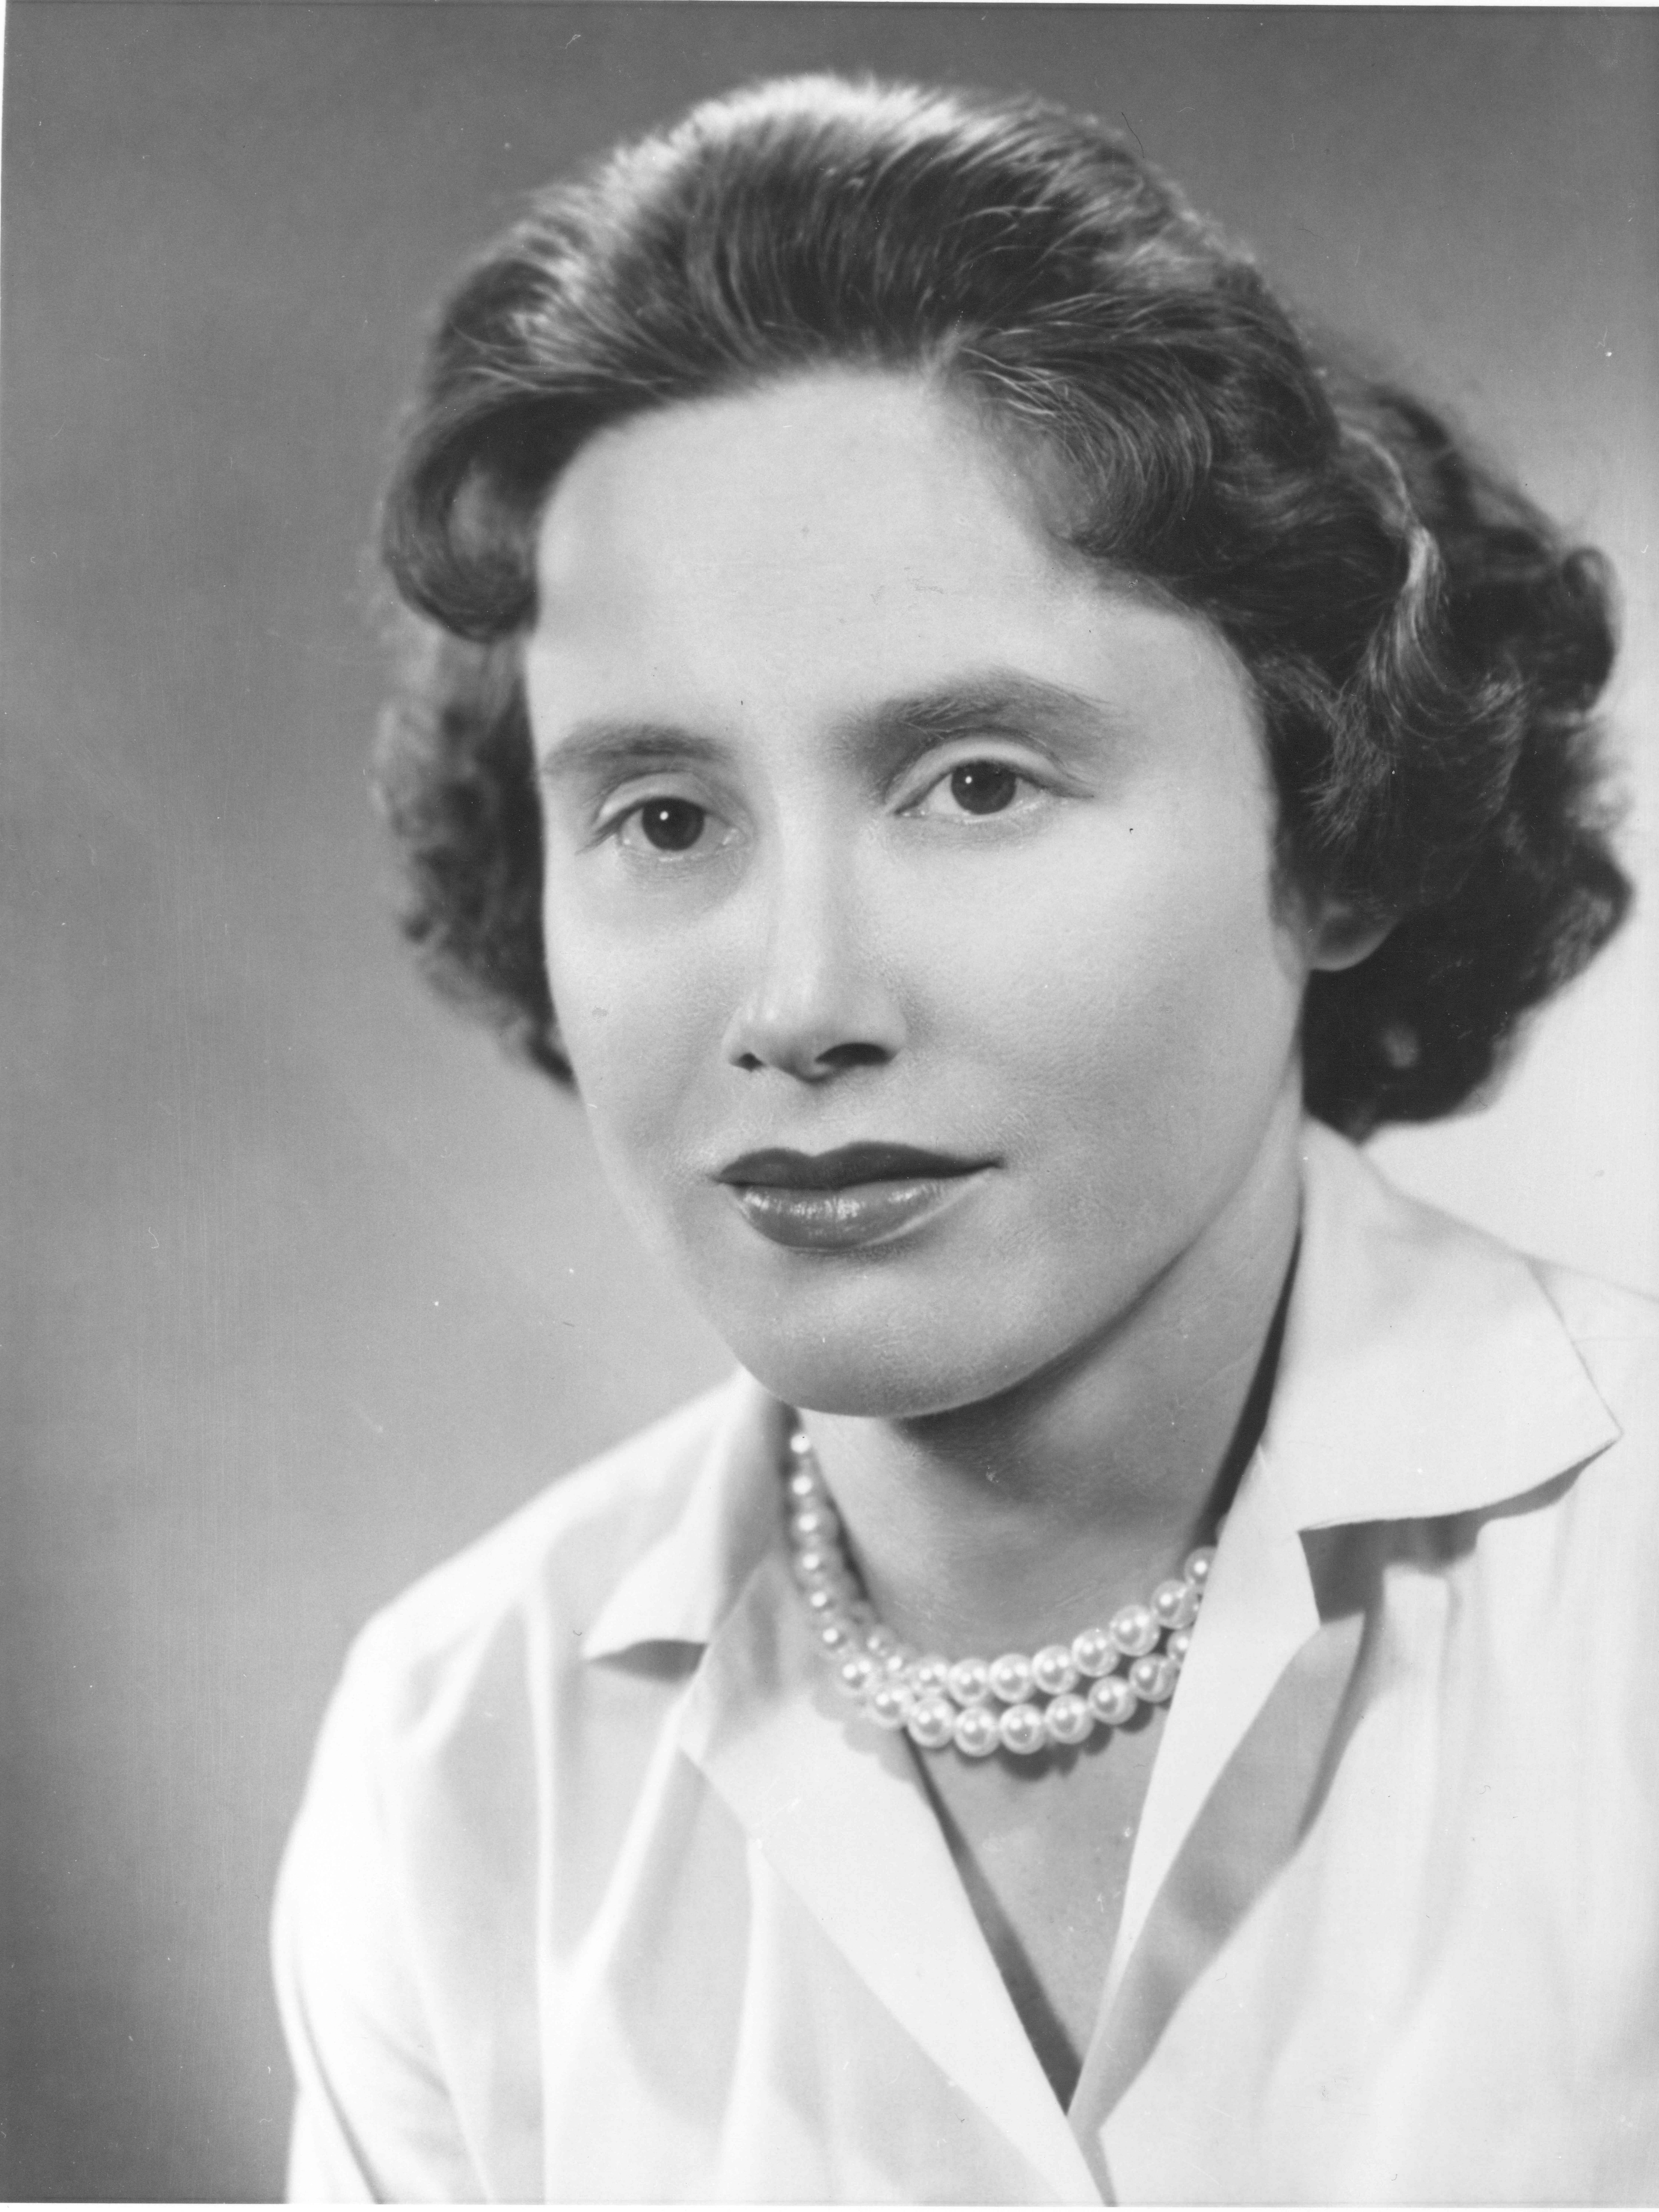 Professional photo of Dr. Ruth Kirschstein with curled hair wearing a pearl necklace and a collared shirt